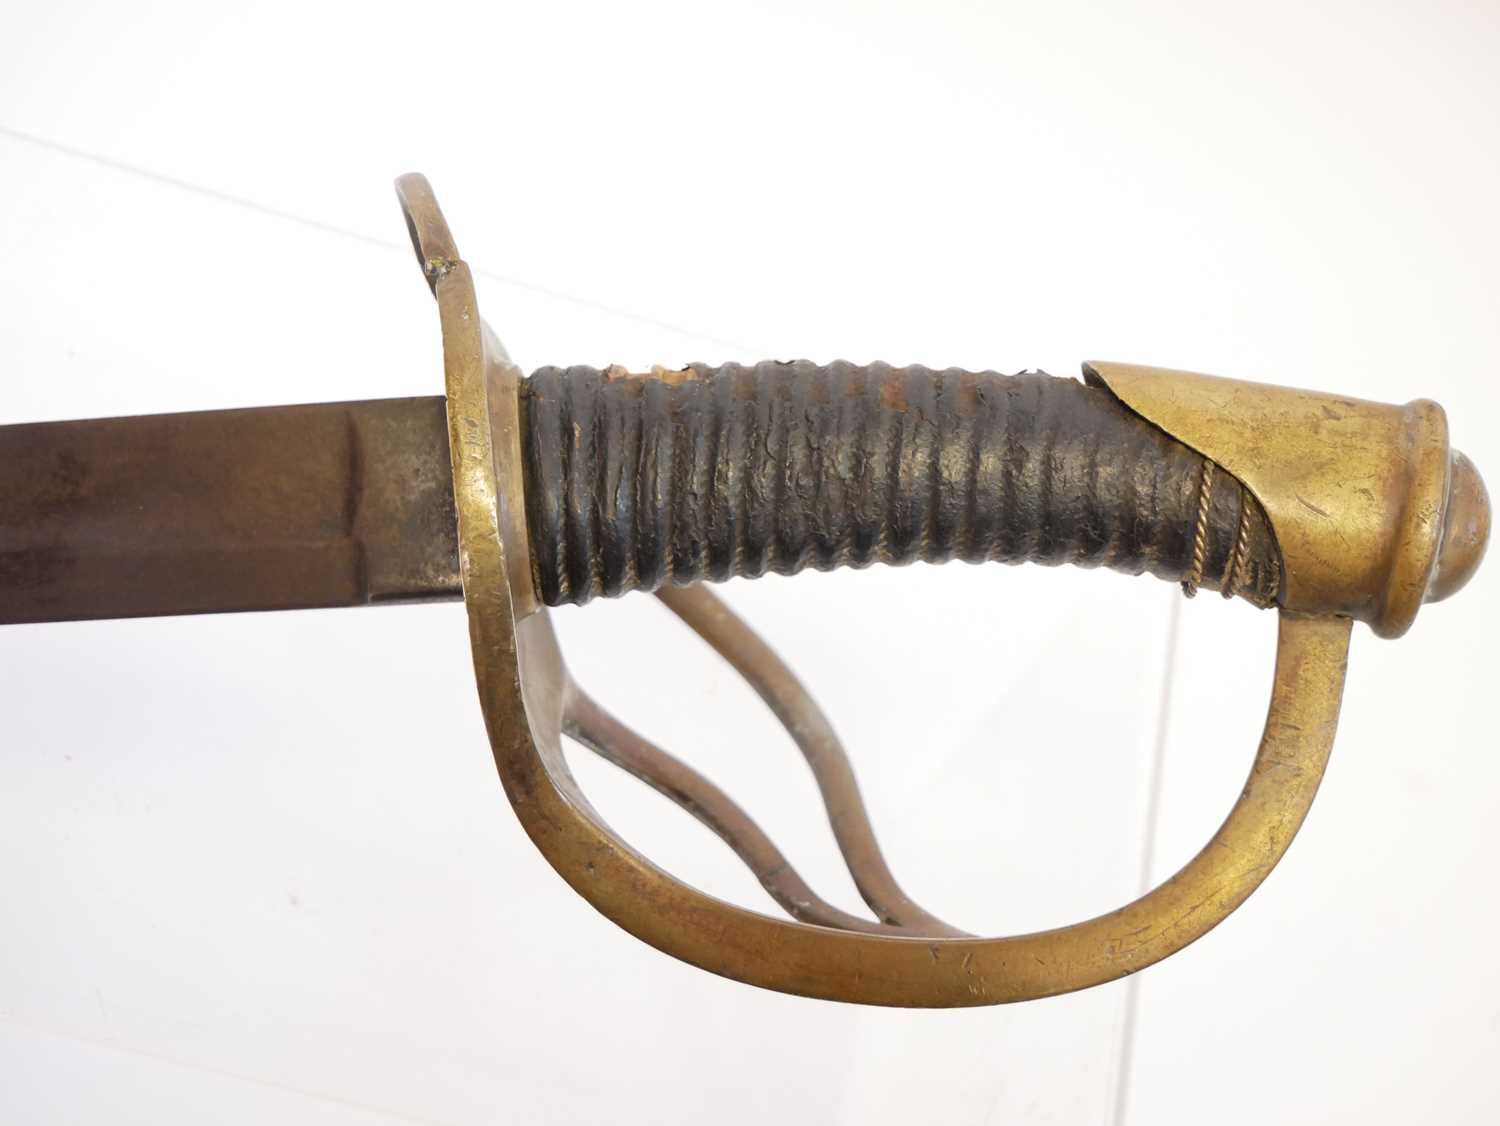 Model 1840 wrist breaker type sword, curved fullered blade with brass guard and leather covered - Image 10 of 13